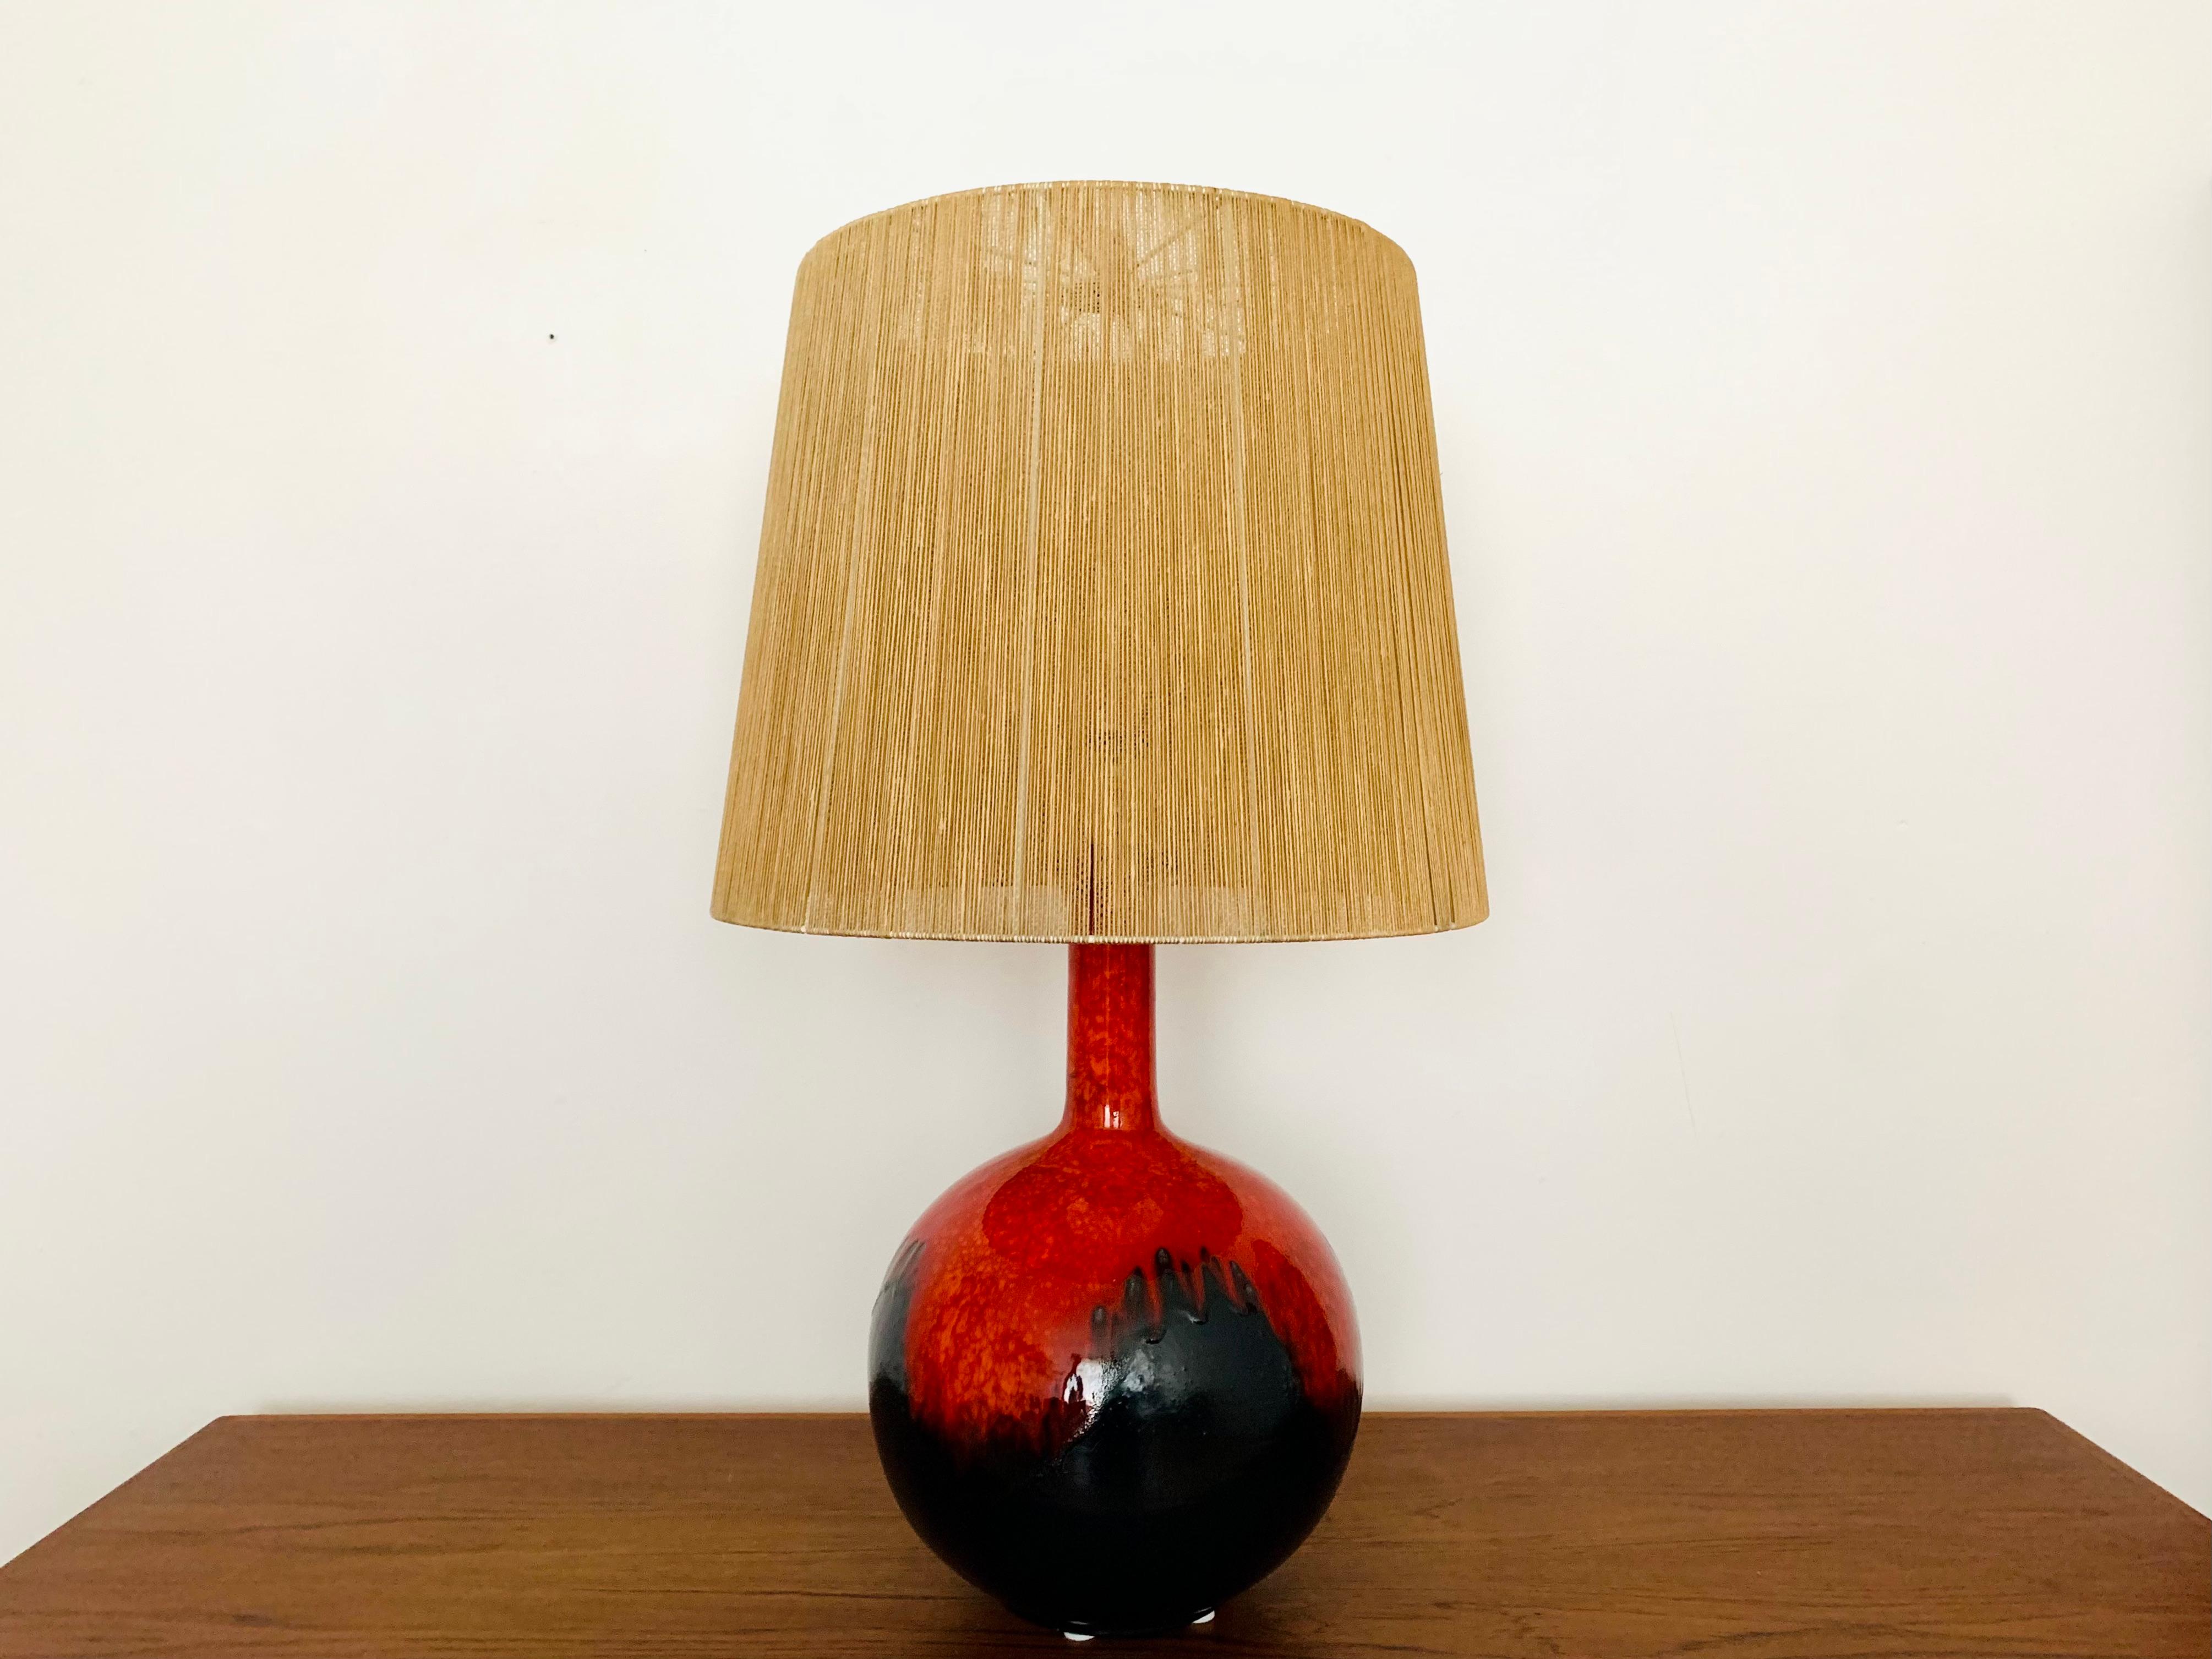 Very nice ceramic table lamp from the 1960s.
Wonderful design and workmanship.
The lamp with the hand-painted glaze is a real eye-catcher.
The raffia lampshade creates a spectacular play of light.

Condition:

Very good vintage condition with slight